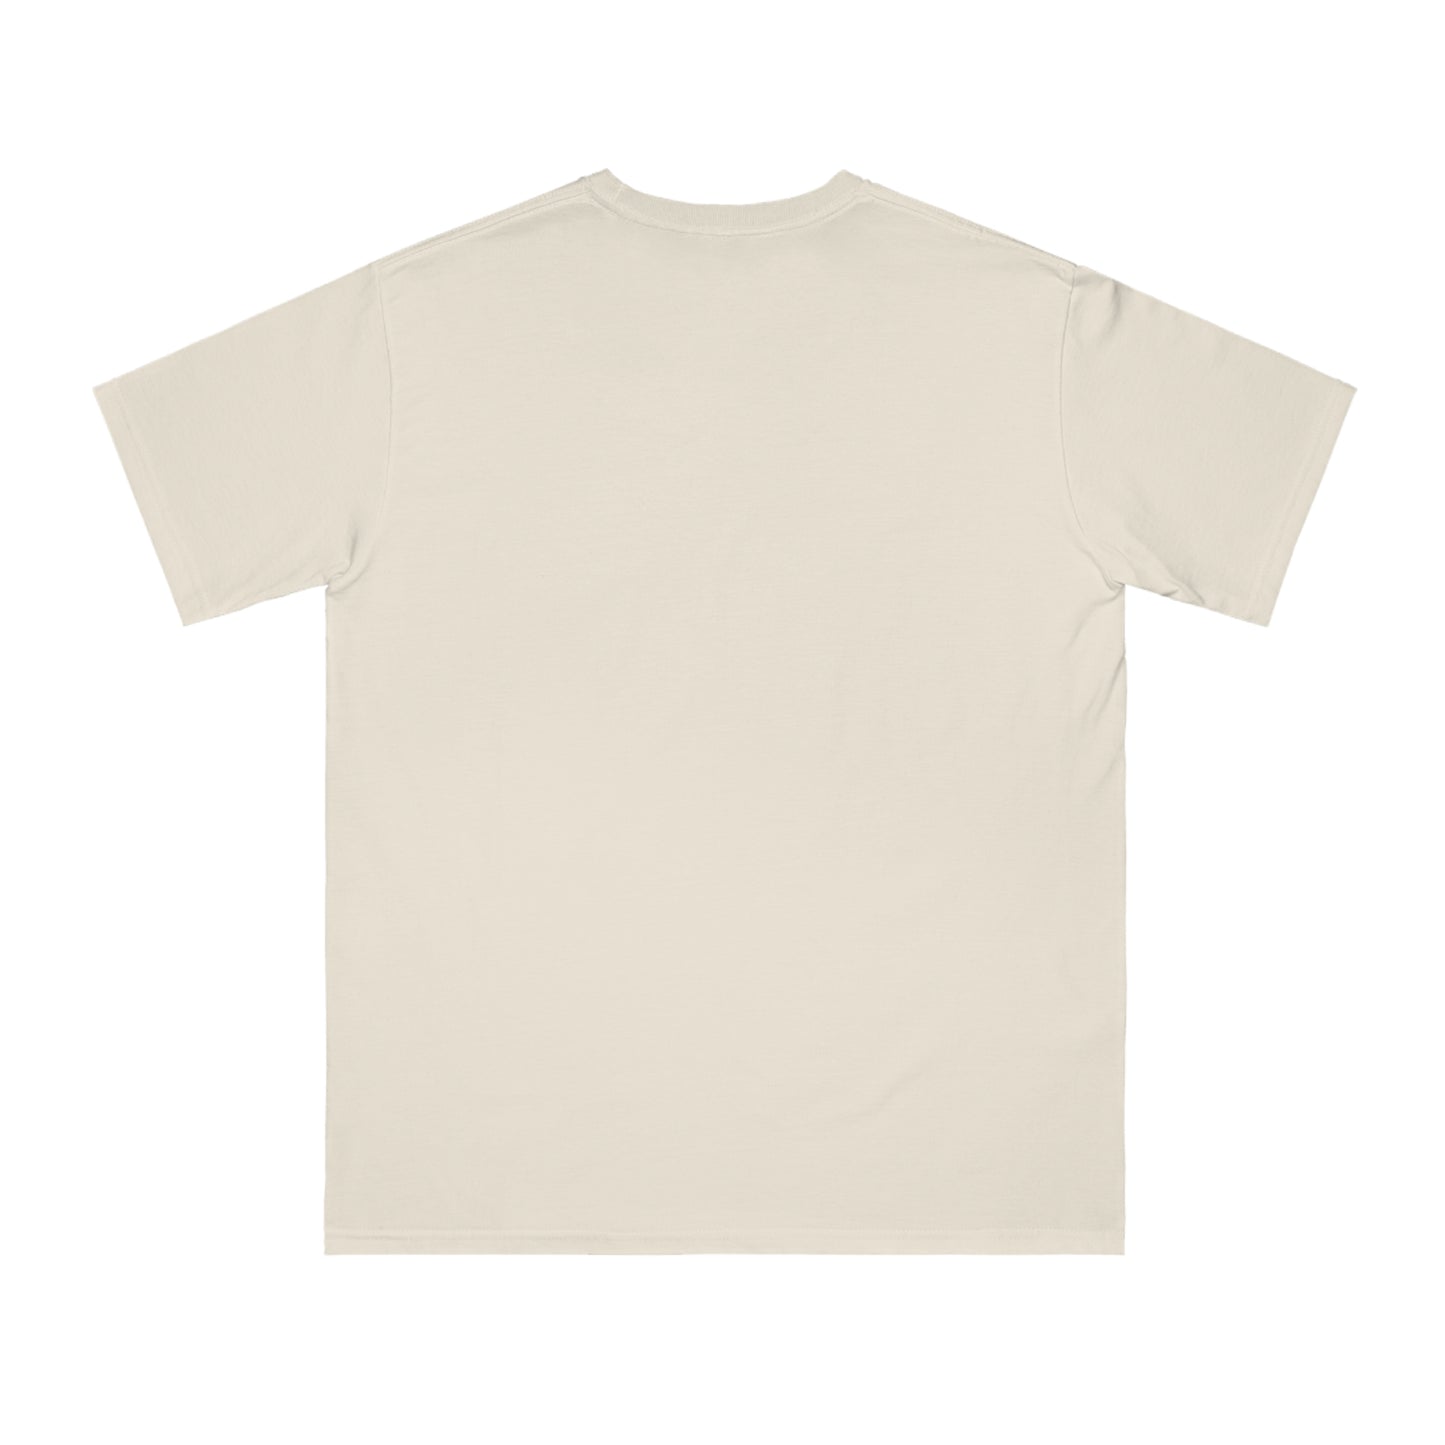 a white t - shirt that has a small logo on it